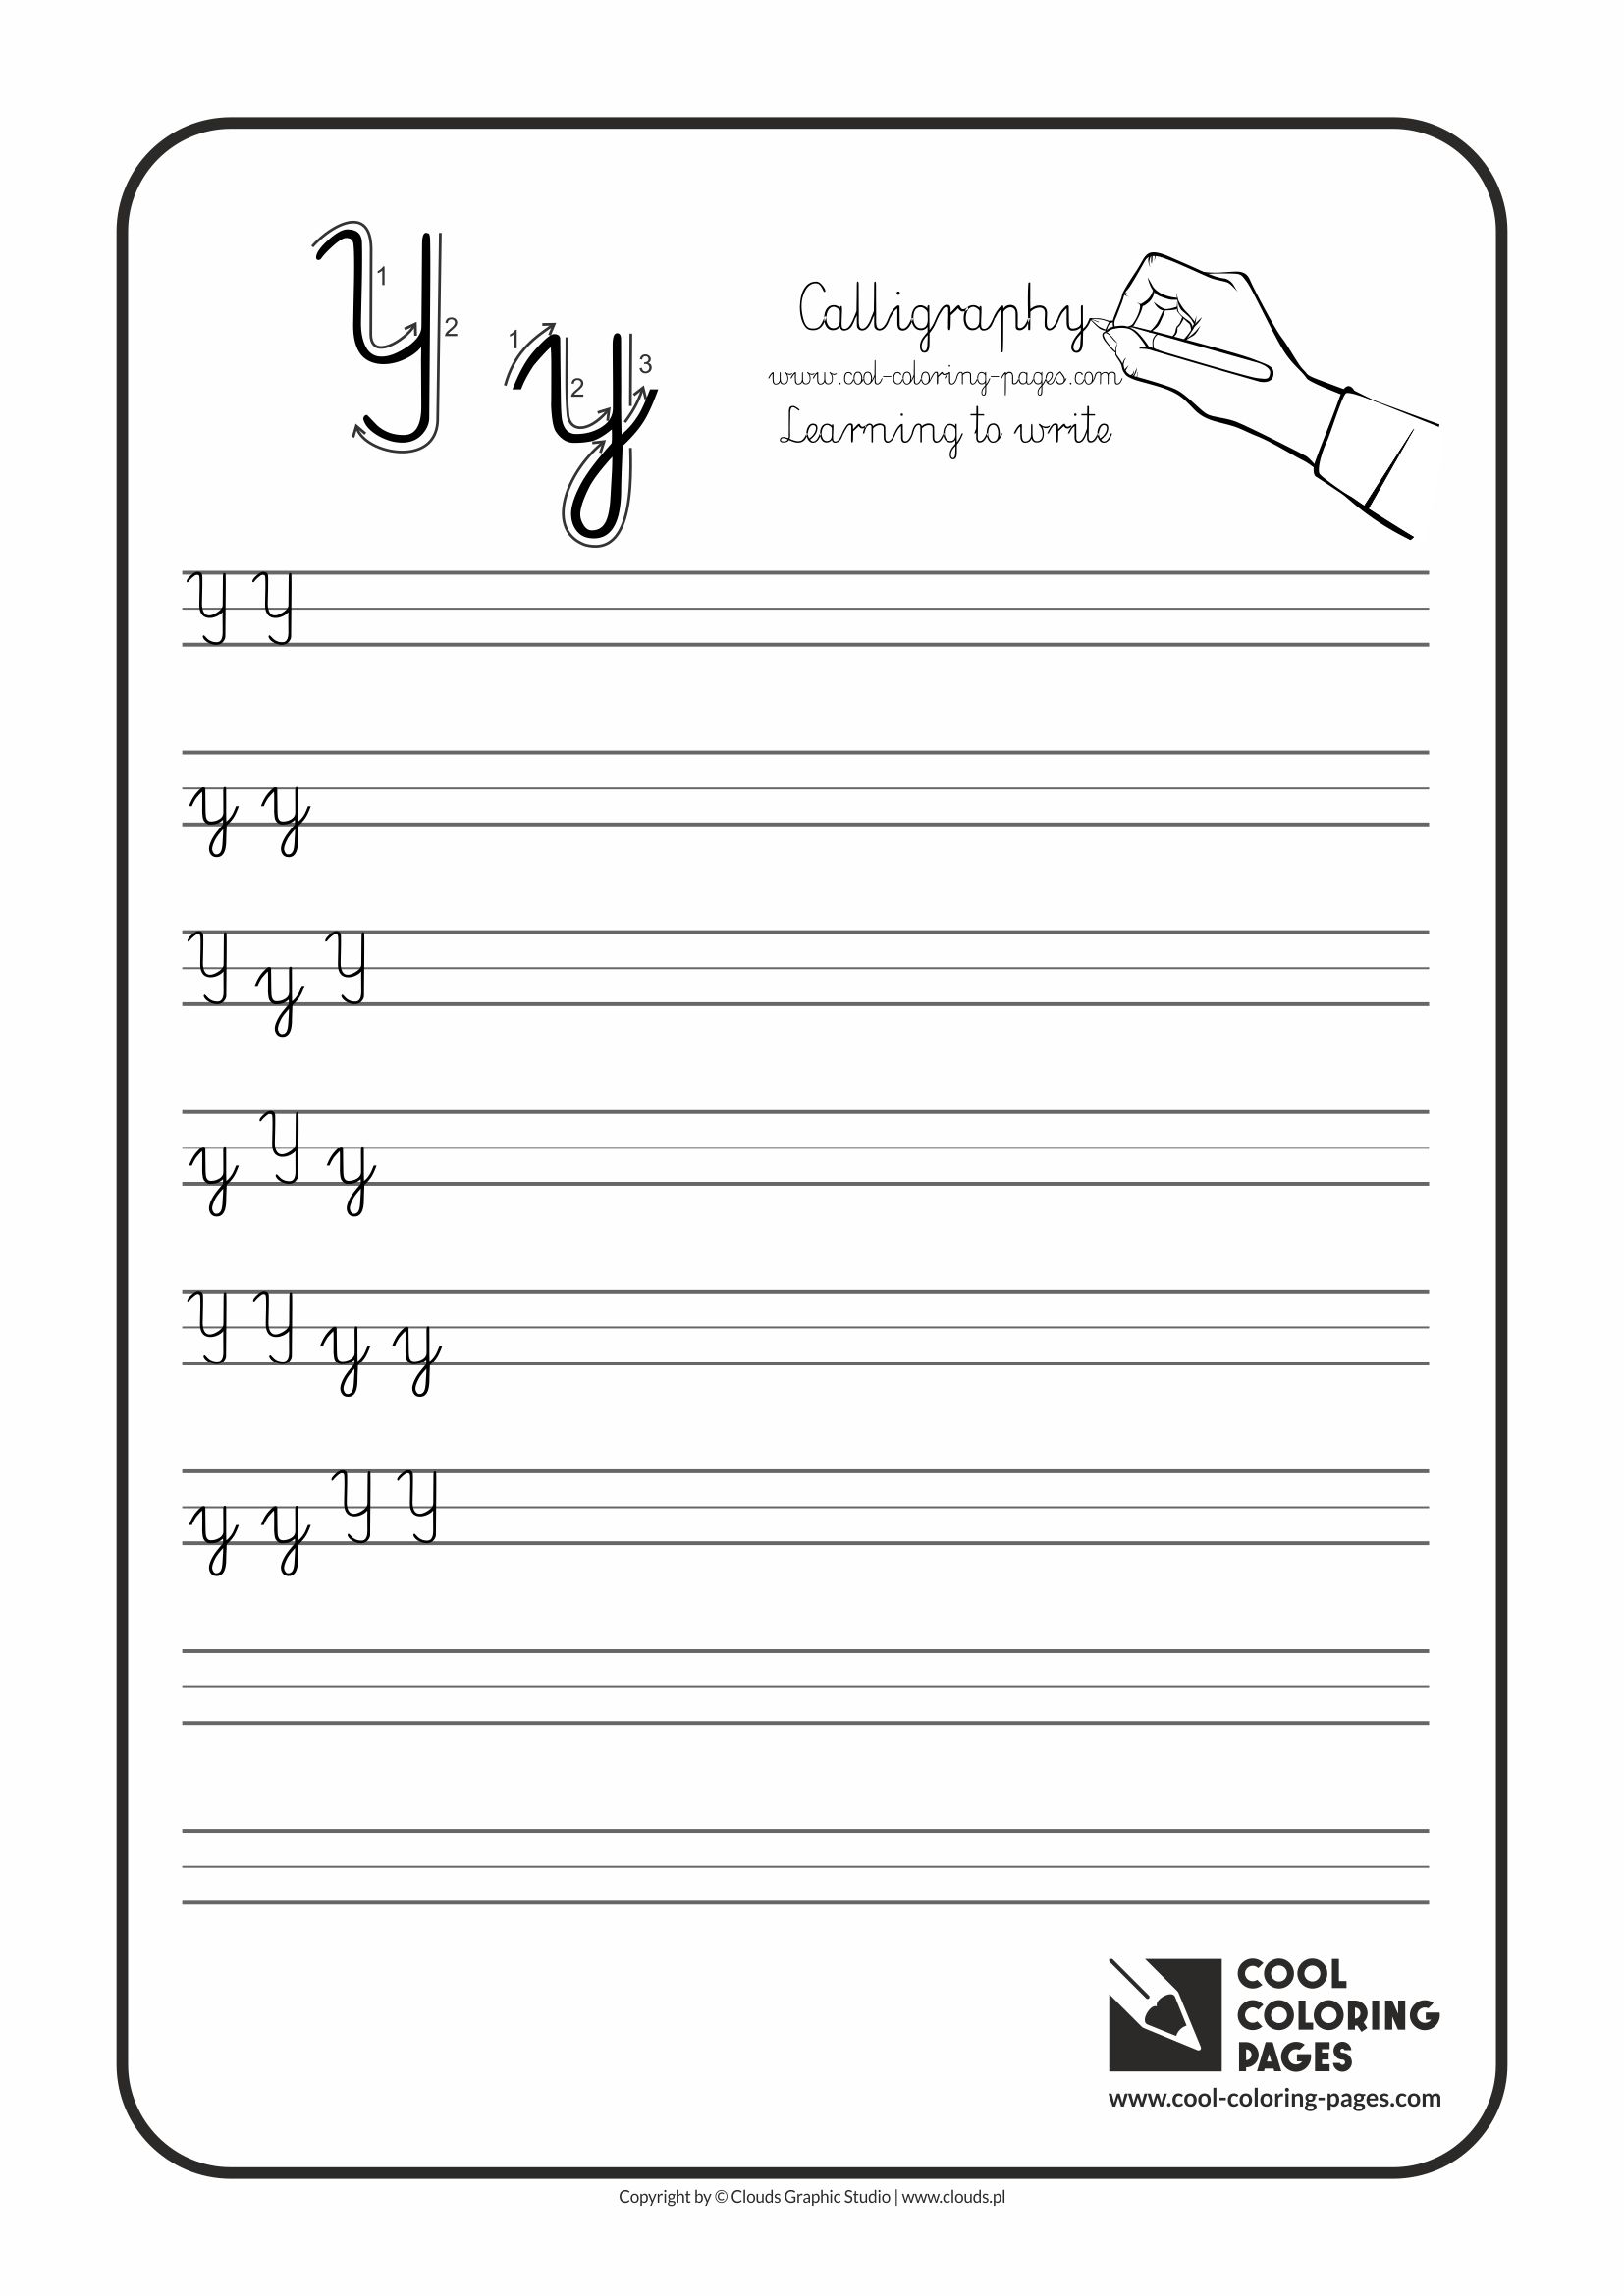 Cool Coloring Pages / Calligraphy / Letter Y - Handwriting for kids / Worksheets